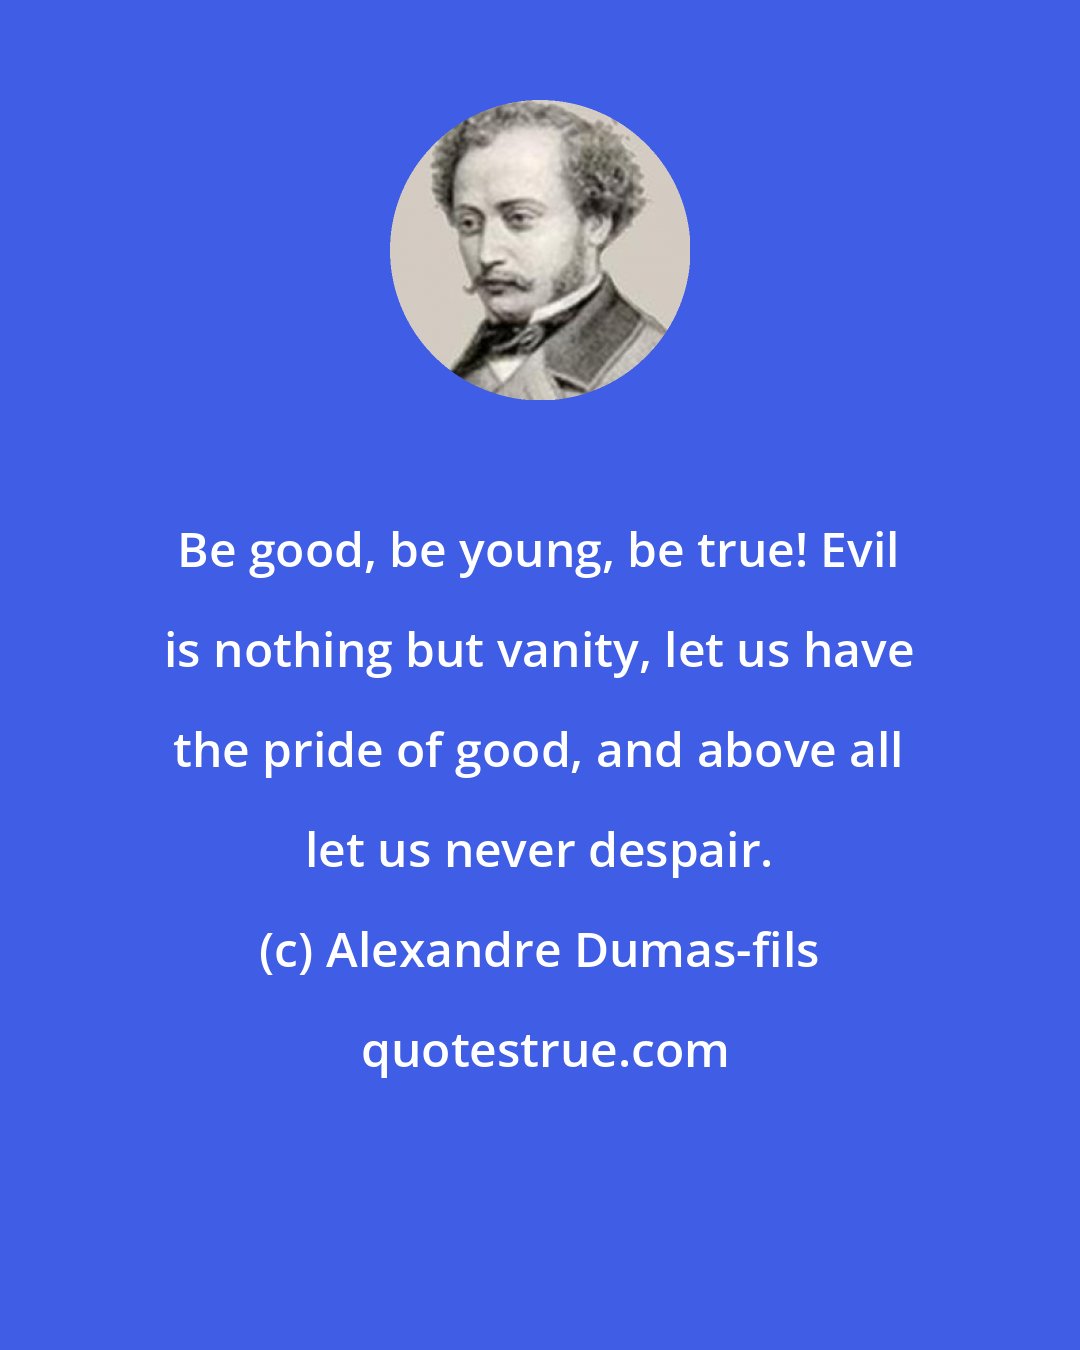 Alexandre Dumas-fils: Be good, be young, be true! Evil is nothing but vanity, let us have the pride of good, and above all let us never despair.